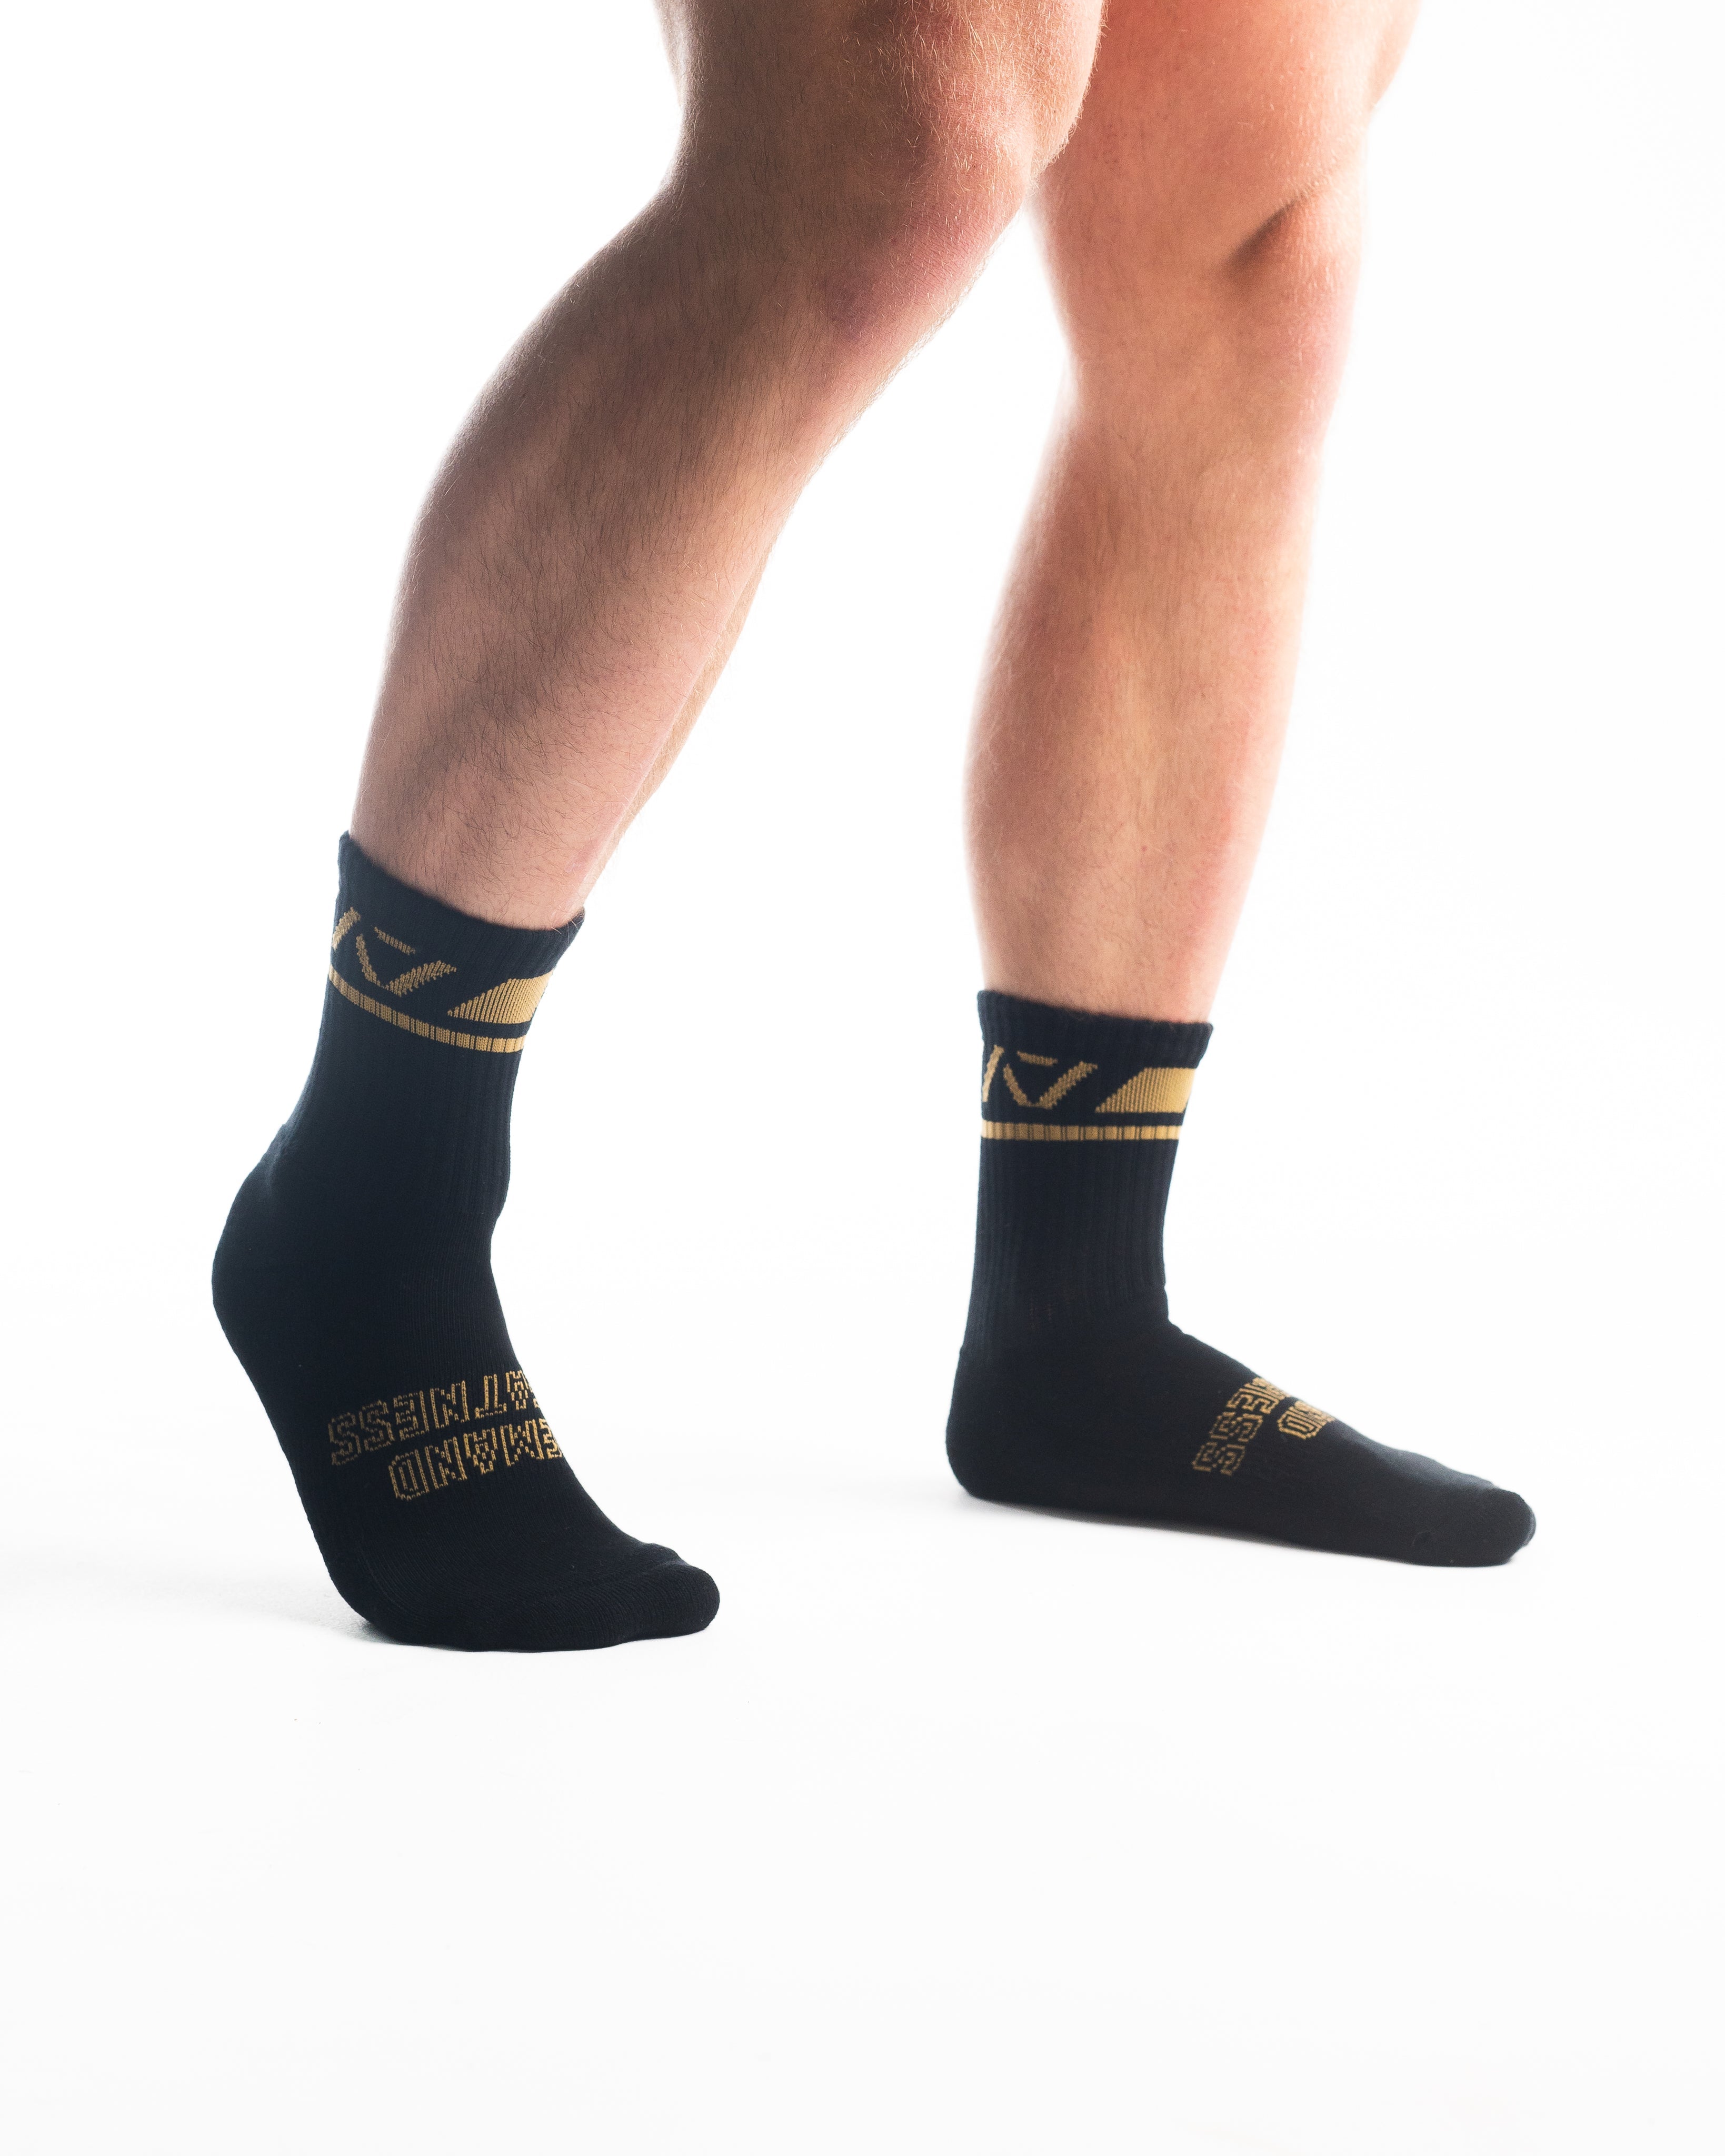 A7 Gold Standard Crew socks showcase gold logos and let your energy show on the platform, in your training or while out and about. The IPF Approved Gold Standard Meet Kit includes Powerlifting Singlet, A7 Meet Shirt, A7 Zebra Wrist Wraps, A7 Deadlift Socks, Hourglass Knee Sleeves (Stiff Knee Sleeves and Rigor Mortis Knee Sleeves). All A7 Powerlifting Equipment shipping to UK, Norway, Switzerland and Iceland.